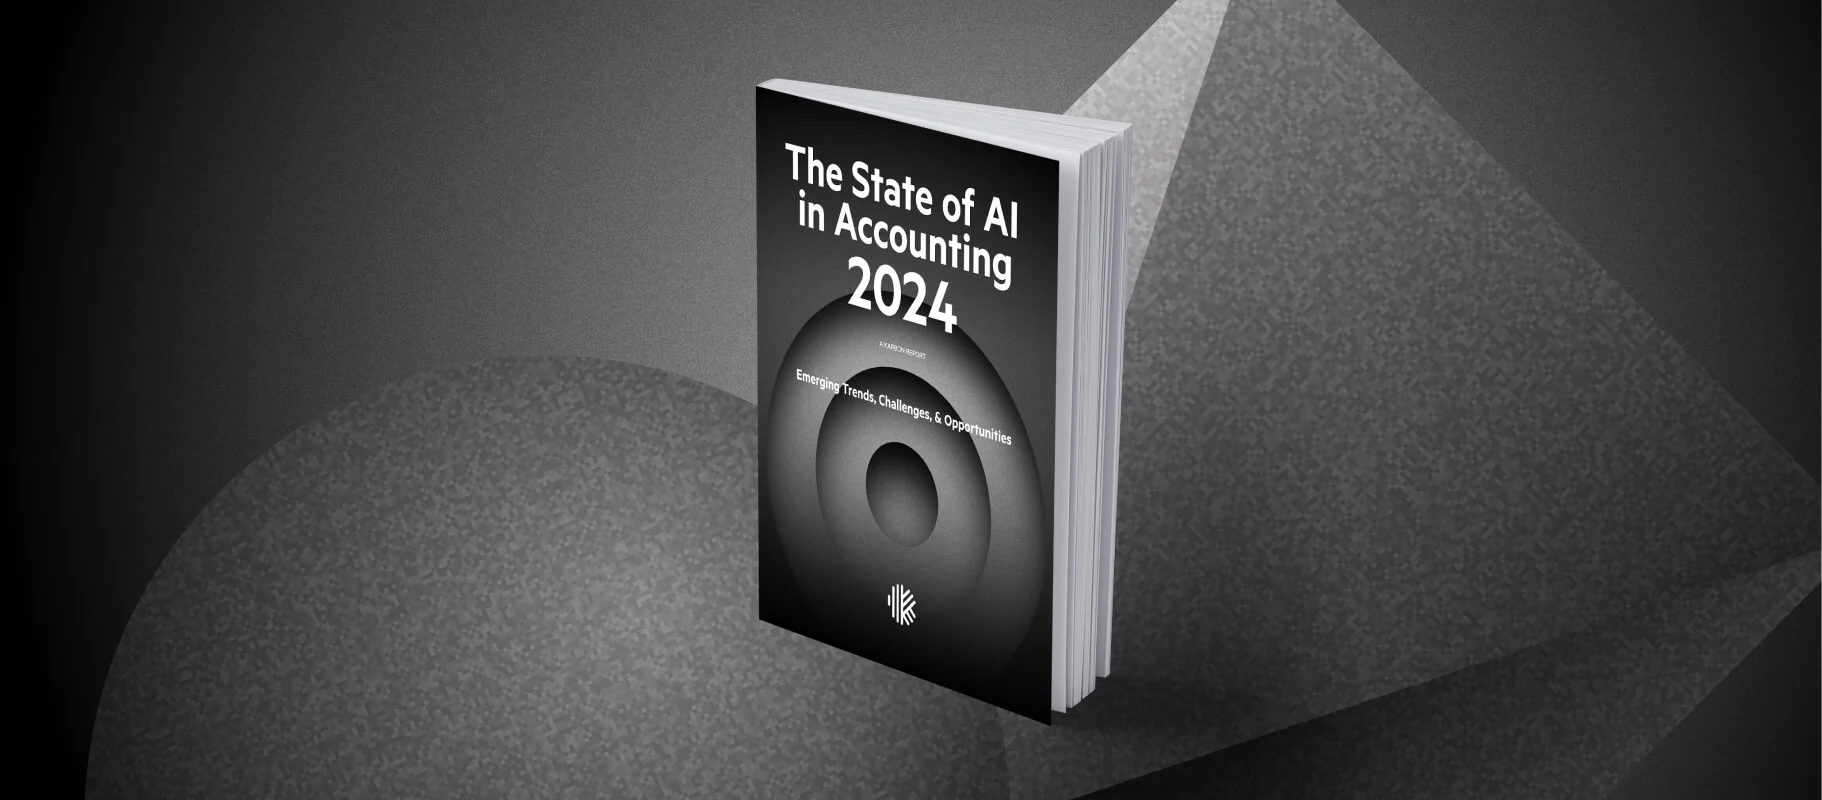 The State of AI in Accounting Report 2024 by Karbon image